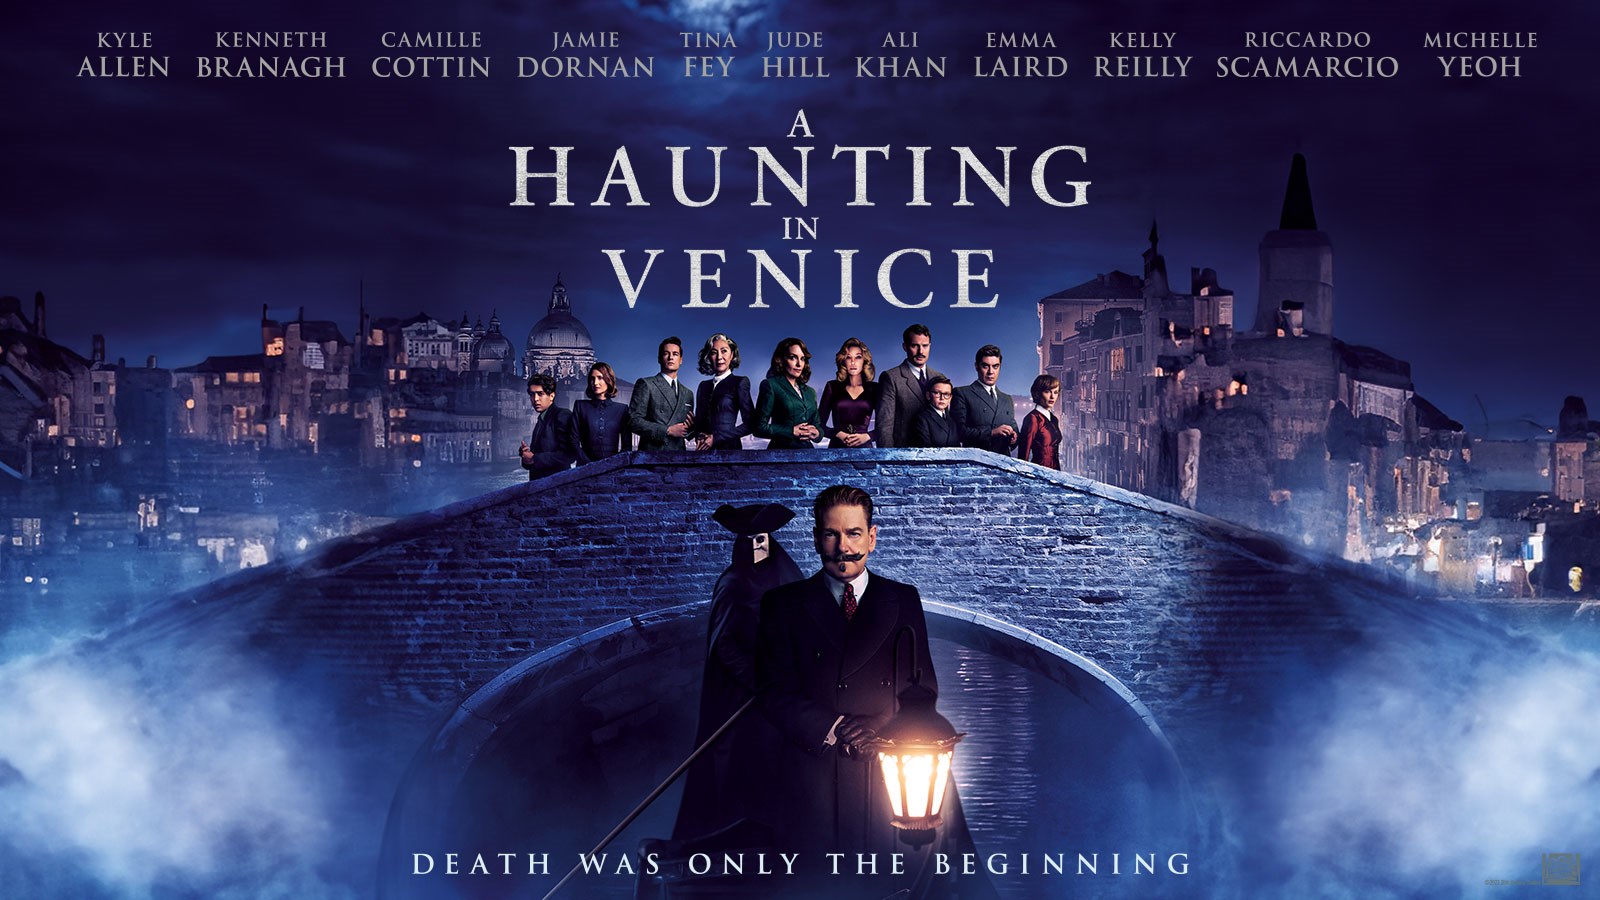 HAUNTING IN VENICE, A